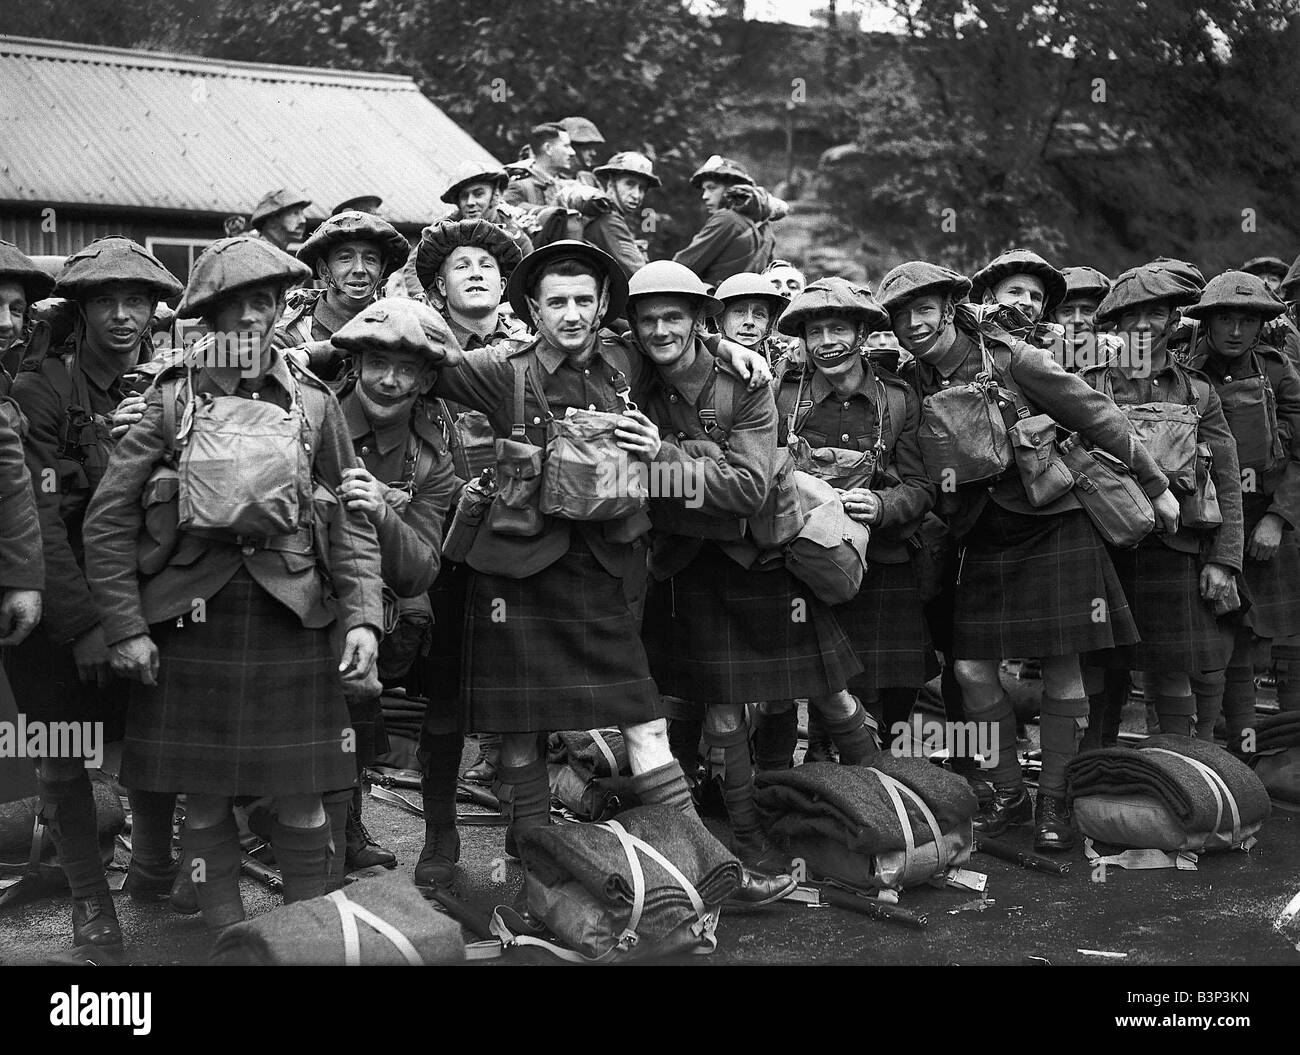 WW2 British Scottish Soldiers wearing army tunics and kilts with their ...